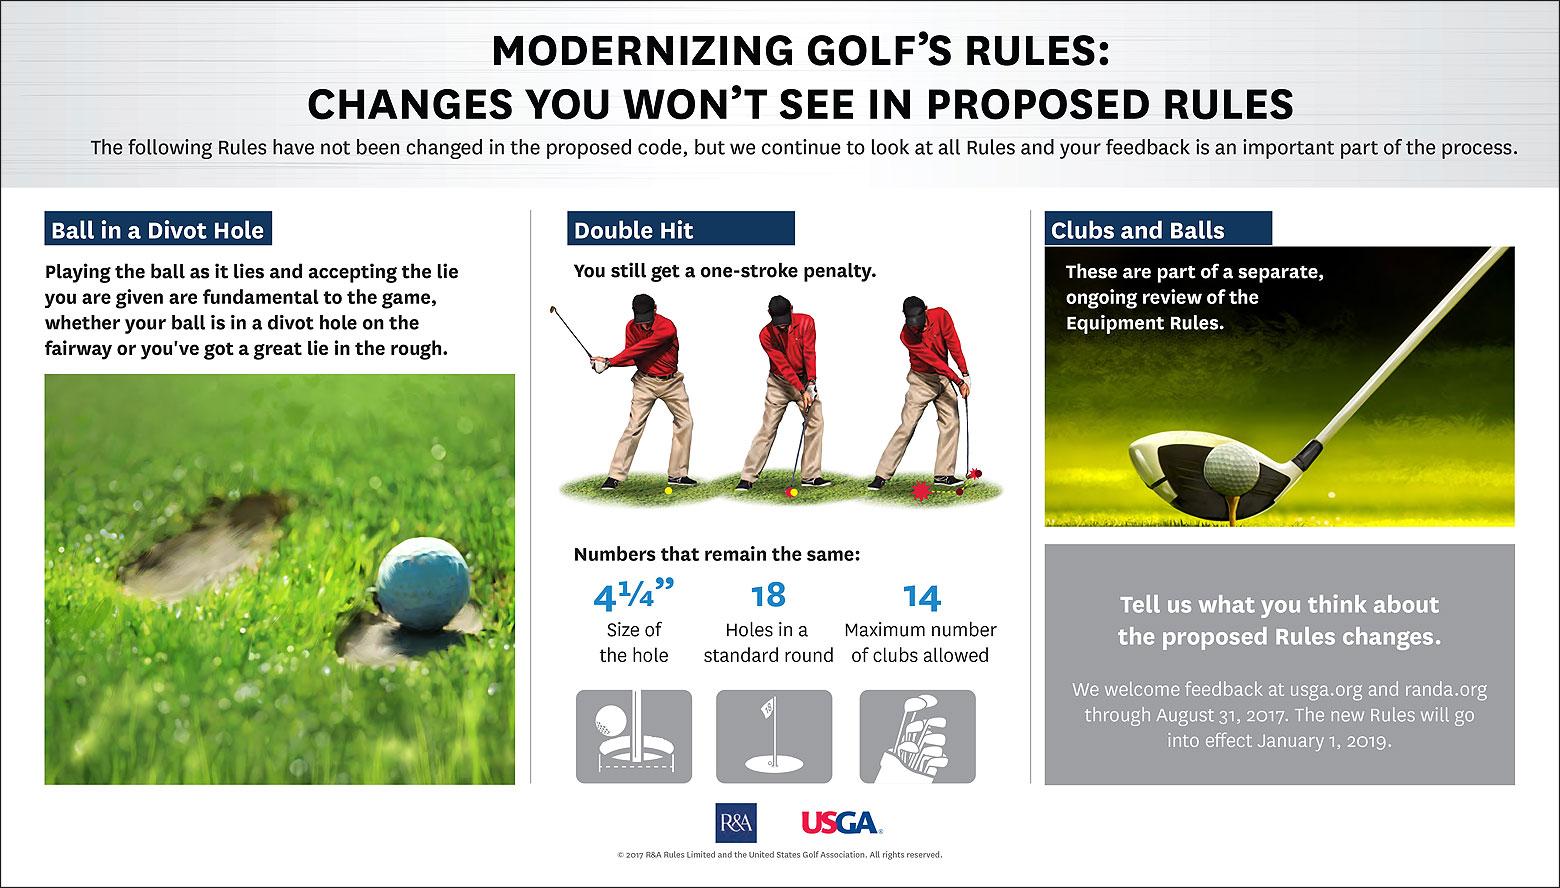 USGA and R&A announce proposed changes to modernize golf’s Rules